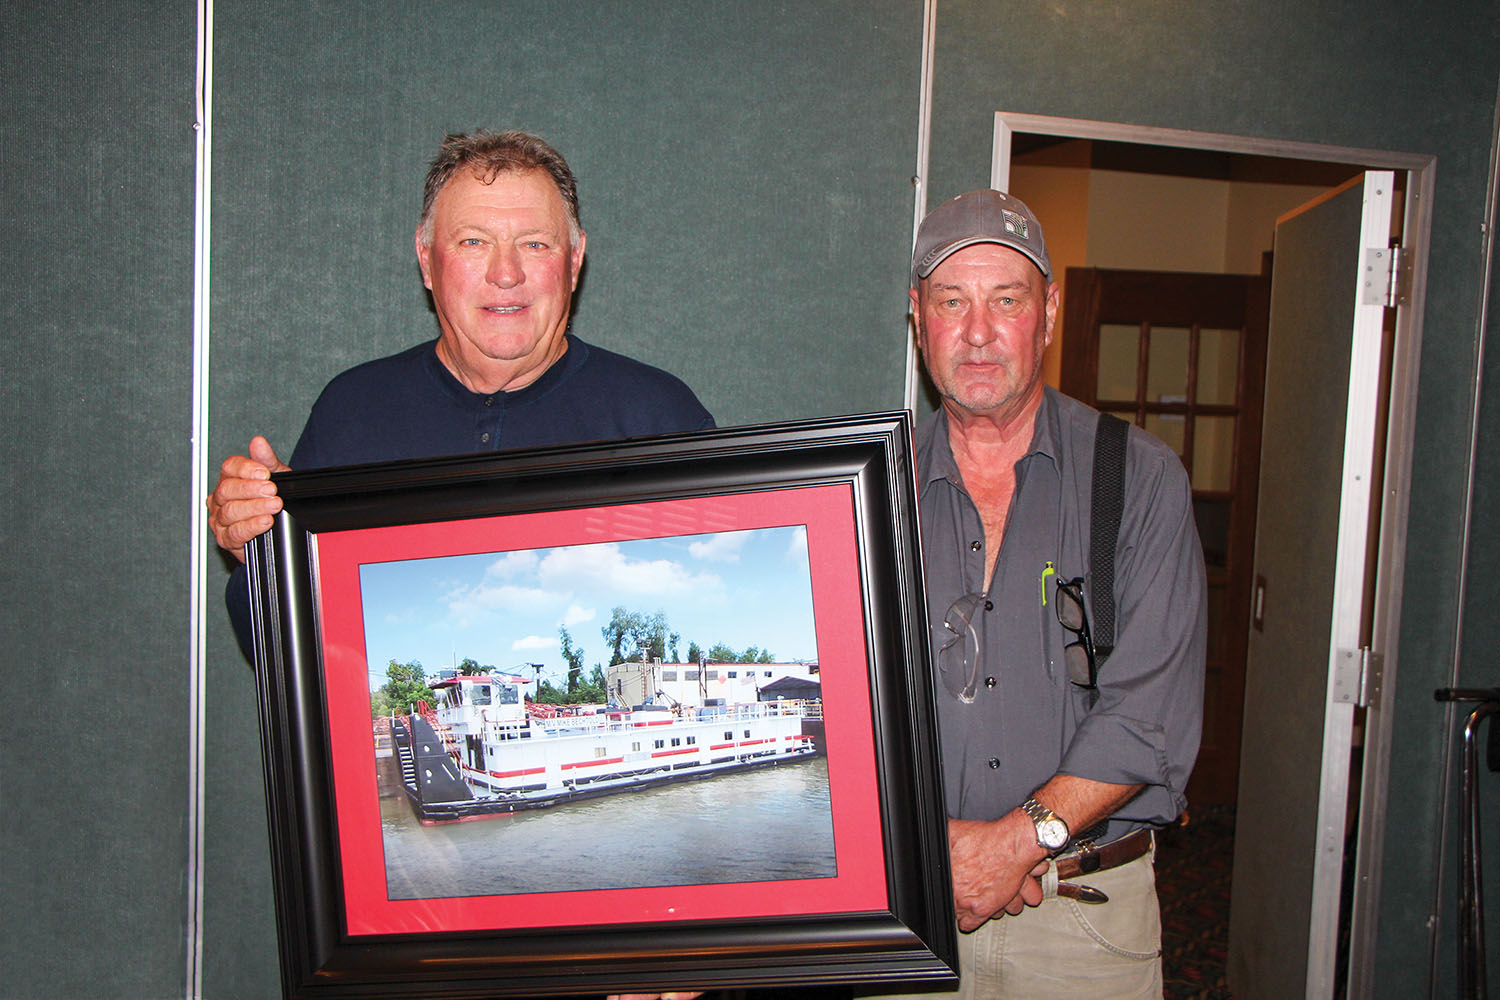 Mike Bechtold, left, receives a photo of the towboat newly renamed in his honor from Bruce McGinnis. (Photo by Zac Metcalf)